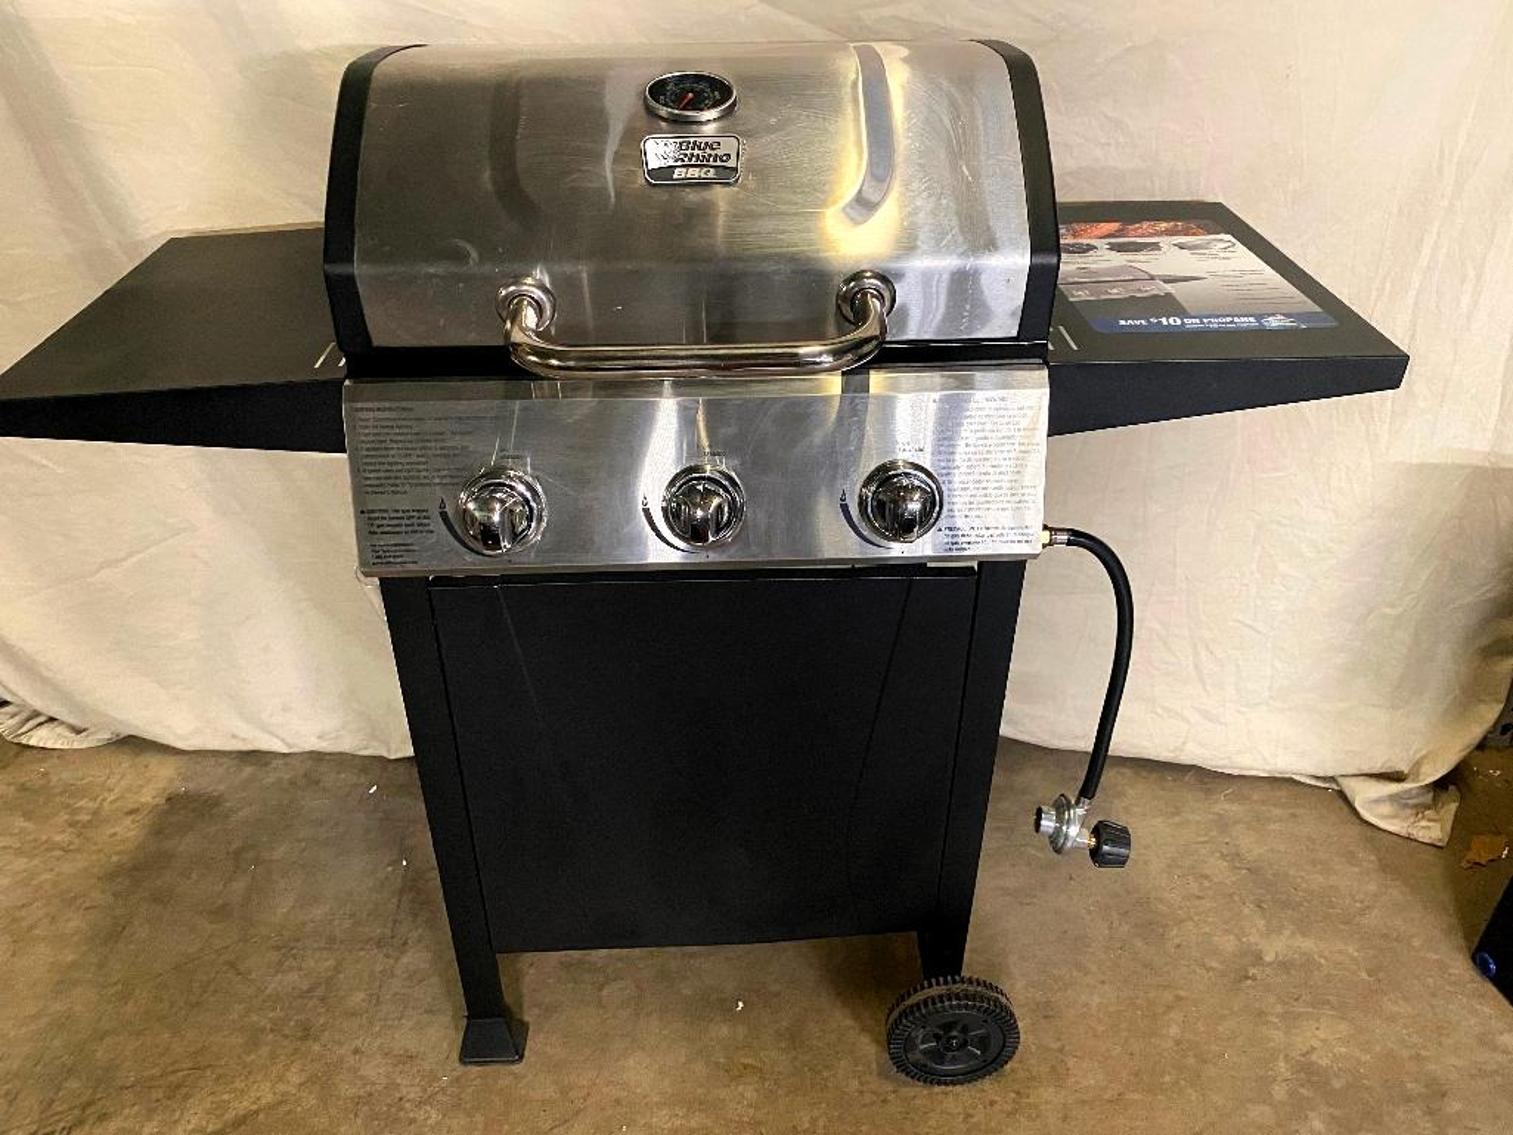 New & Used Pit Smokers, Grills, Vanities, Doors, Lawncare, Beds & More